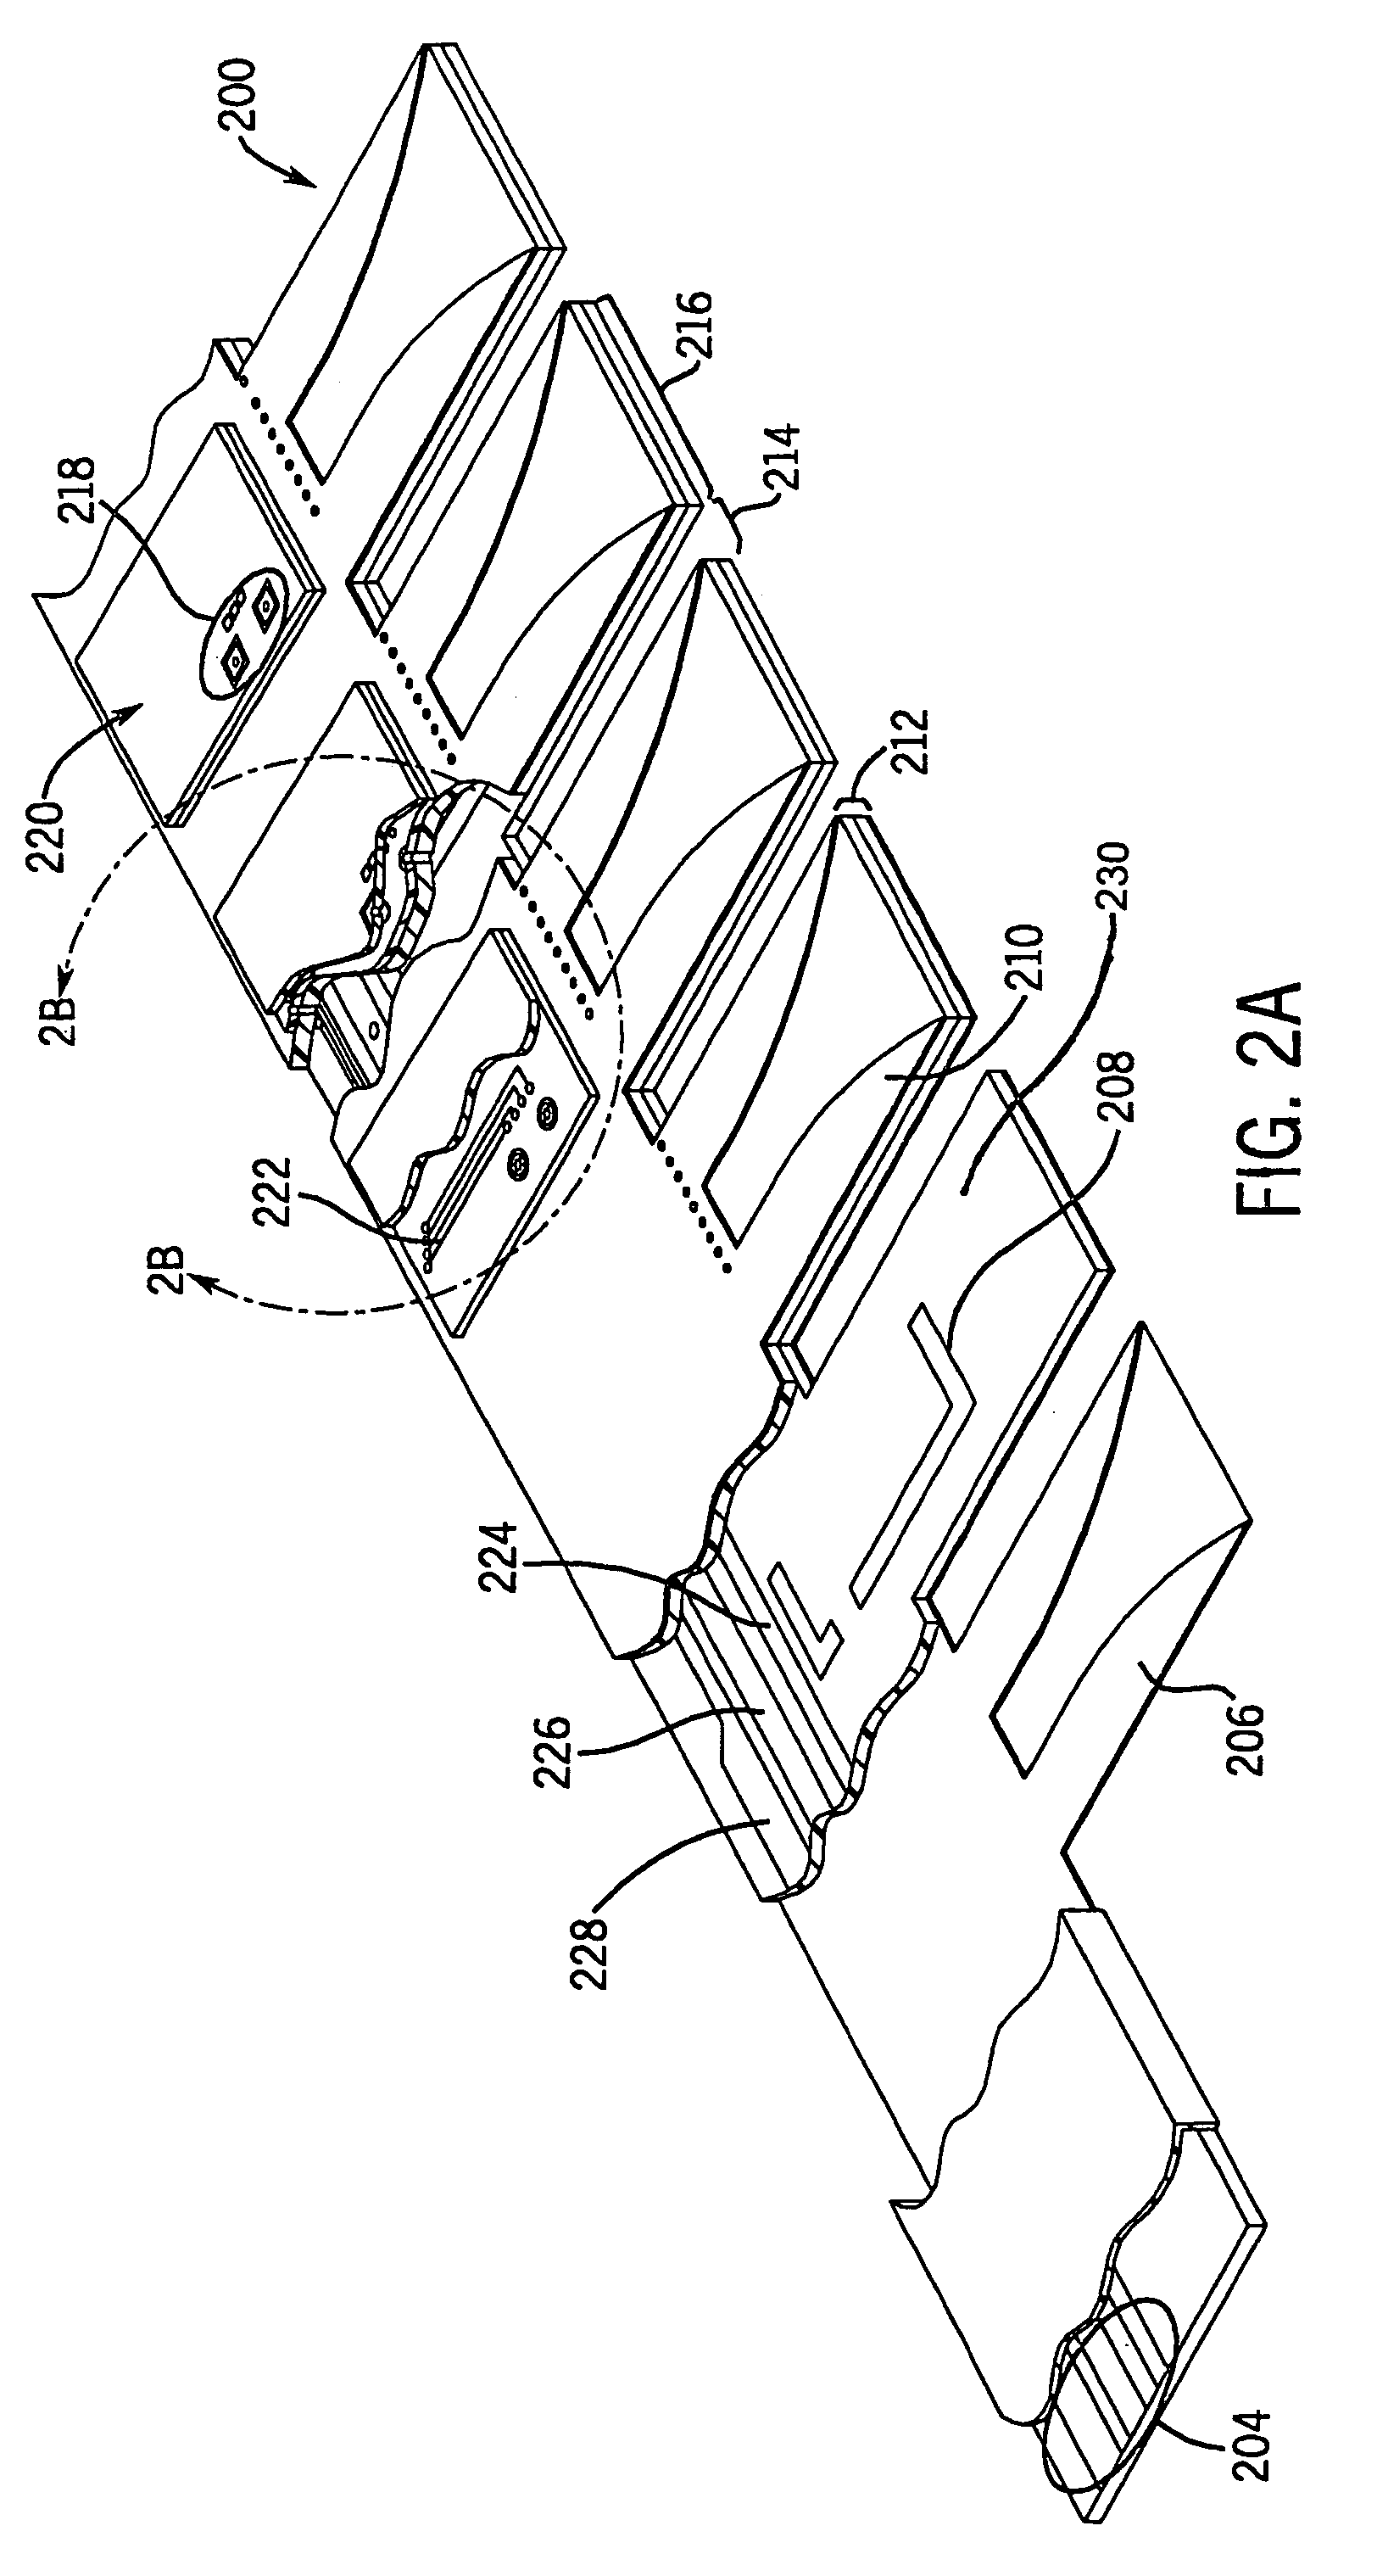 Phased array antenna interconnect having substrate slat structures